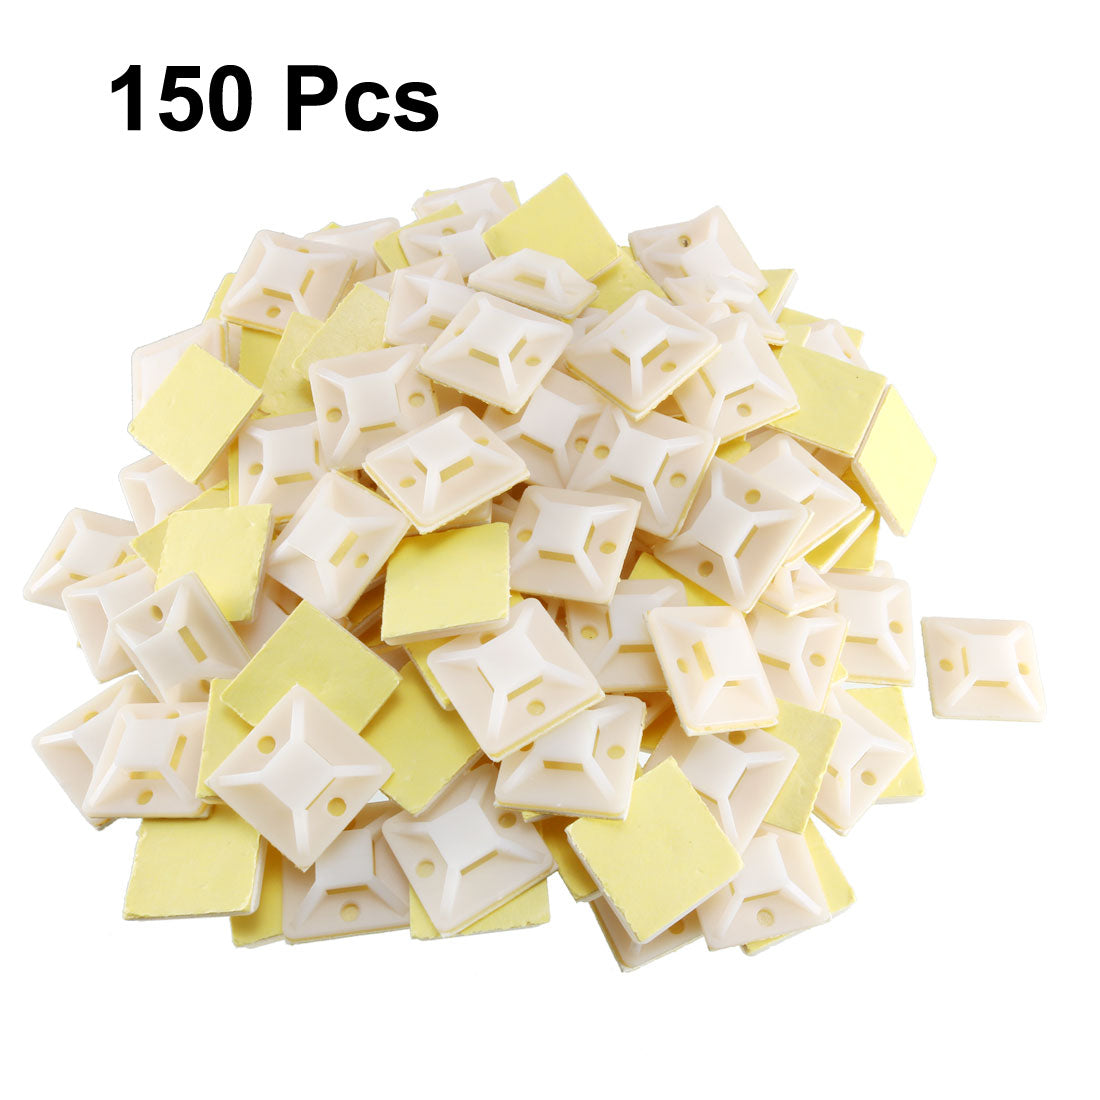 uxcell Uxcell 150pcs Self Adhesive Cable Tie Mounts Wire Base Holders 25mm x 25mm